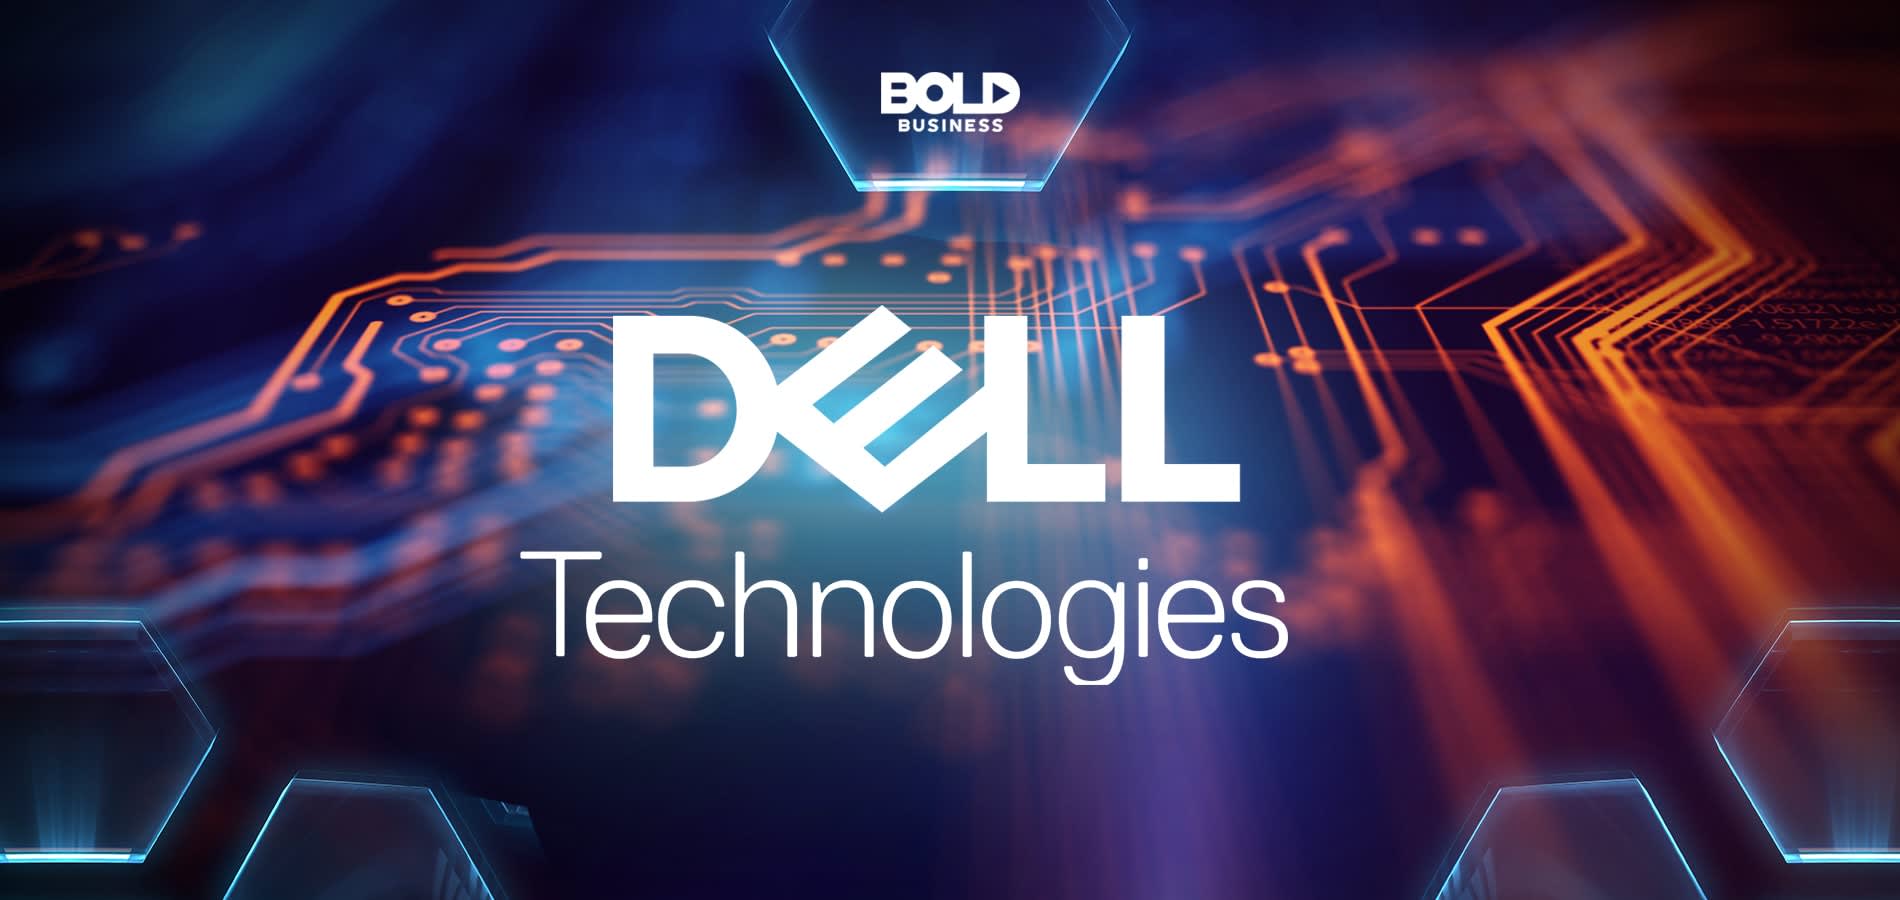 What's it like to work for Dell Technologies?